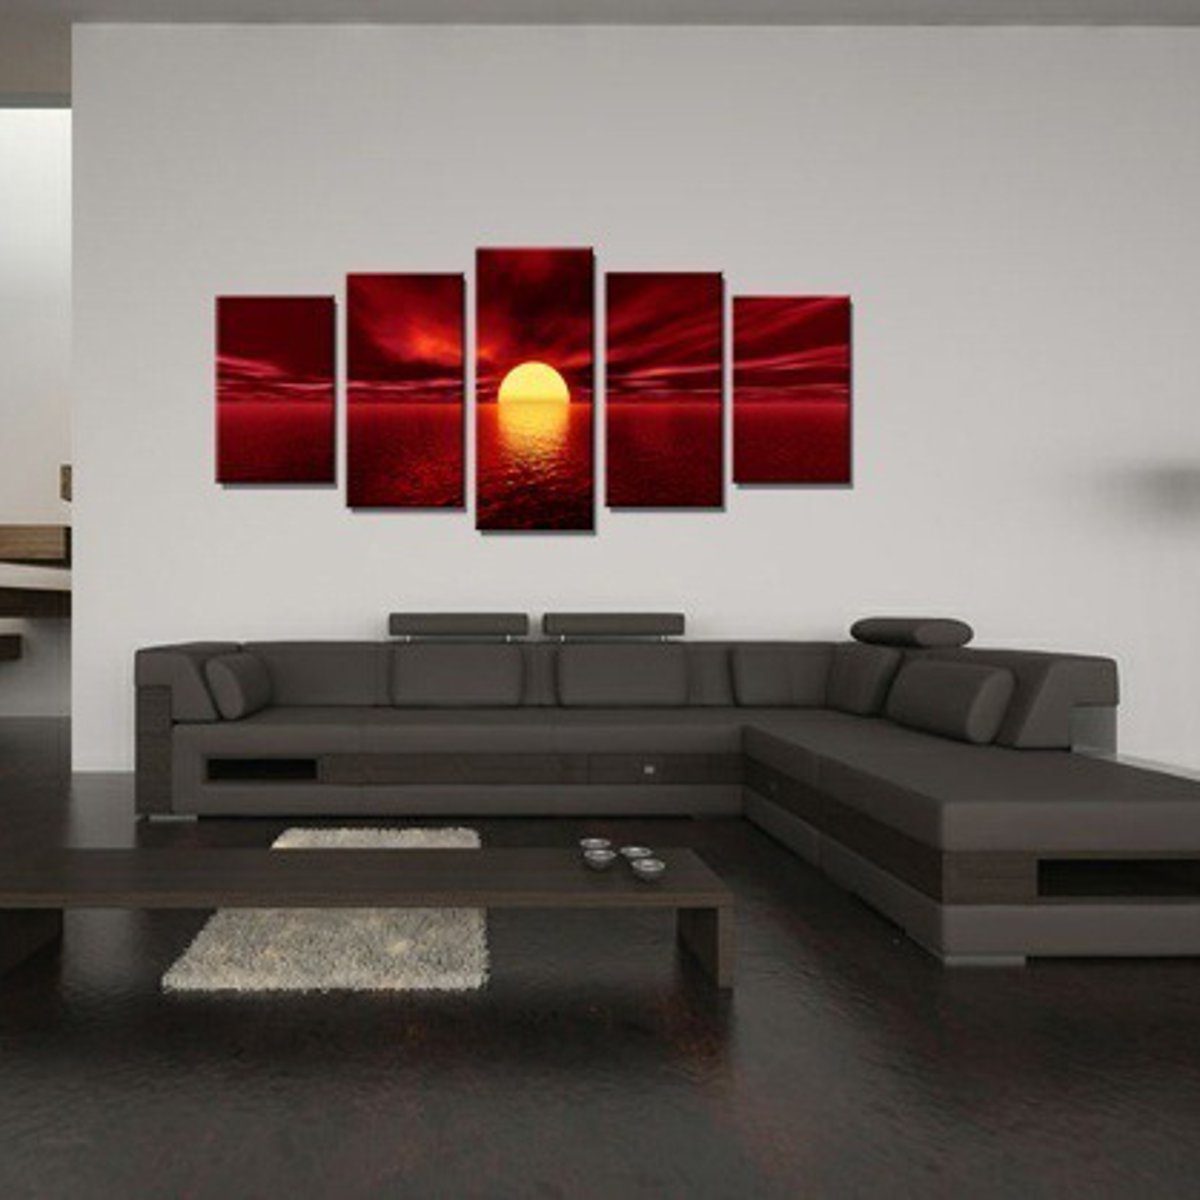 5Pcs-Wall-Decorative-Paintings-Canvas-Print-Art-Pictures-Frameless-Wall-Hanging-Decorations-for-Home-1720818-4